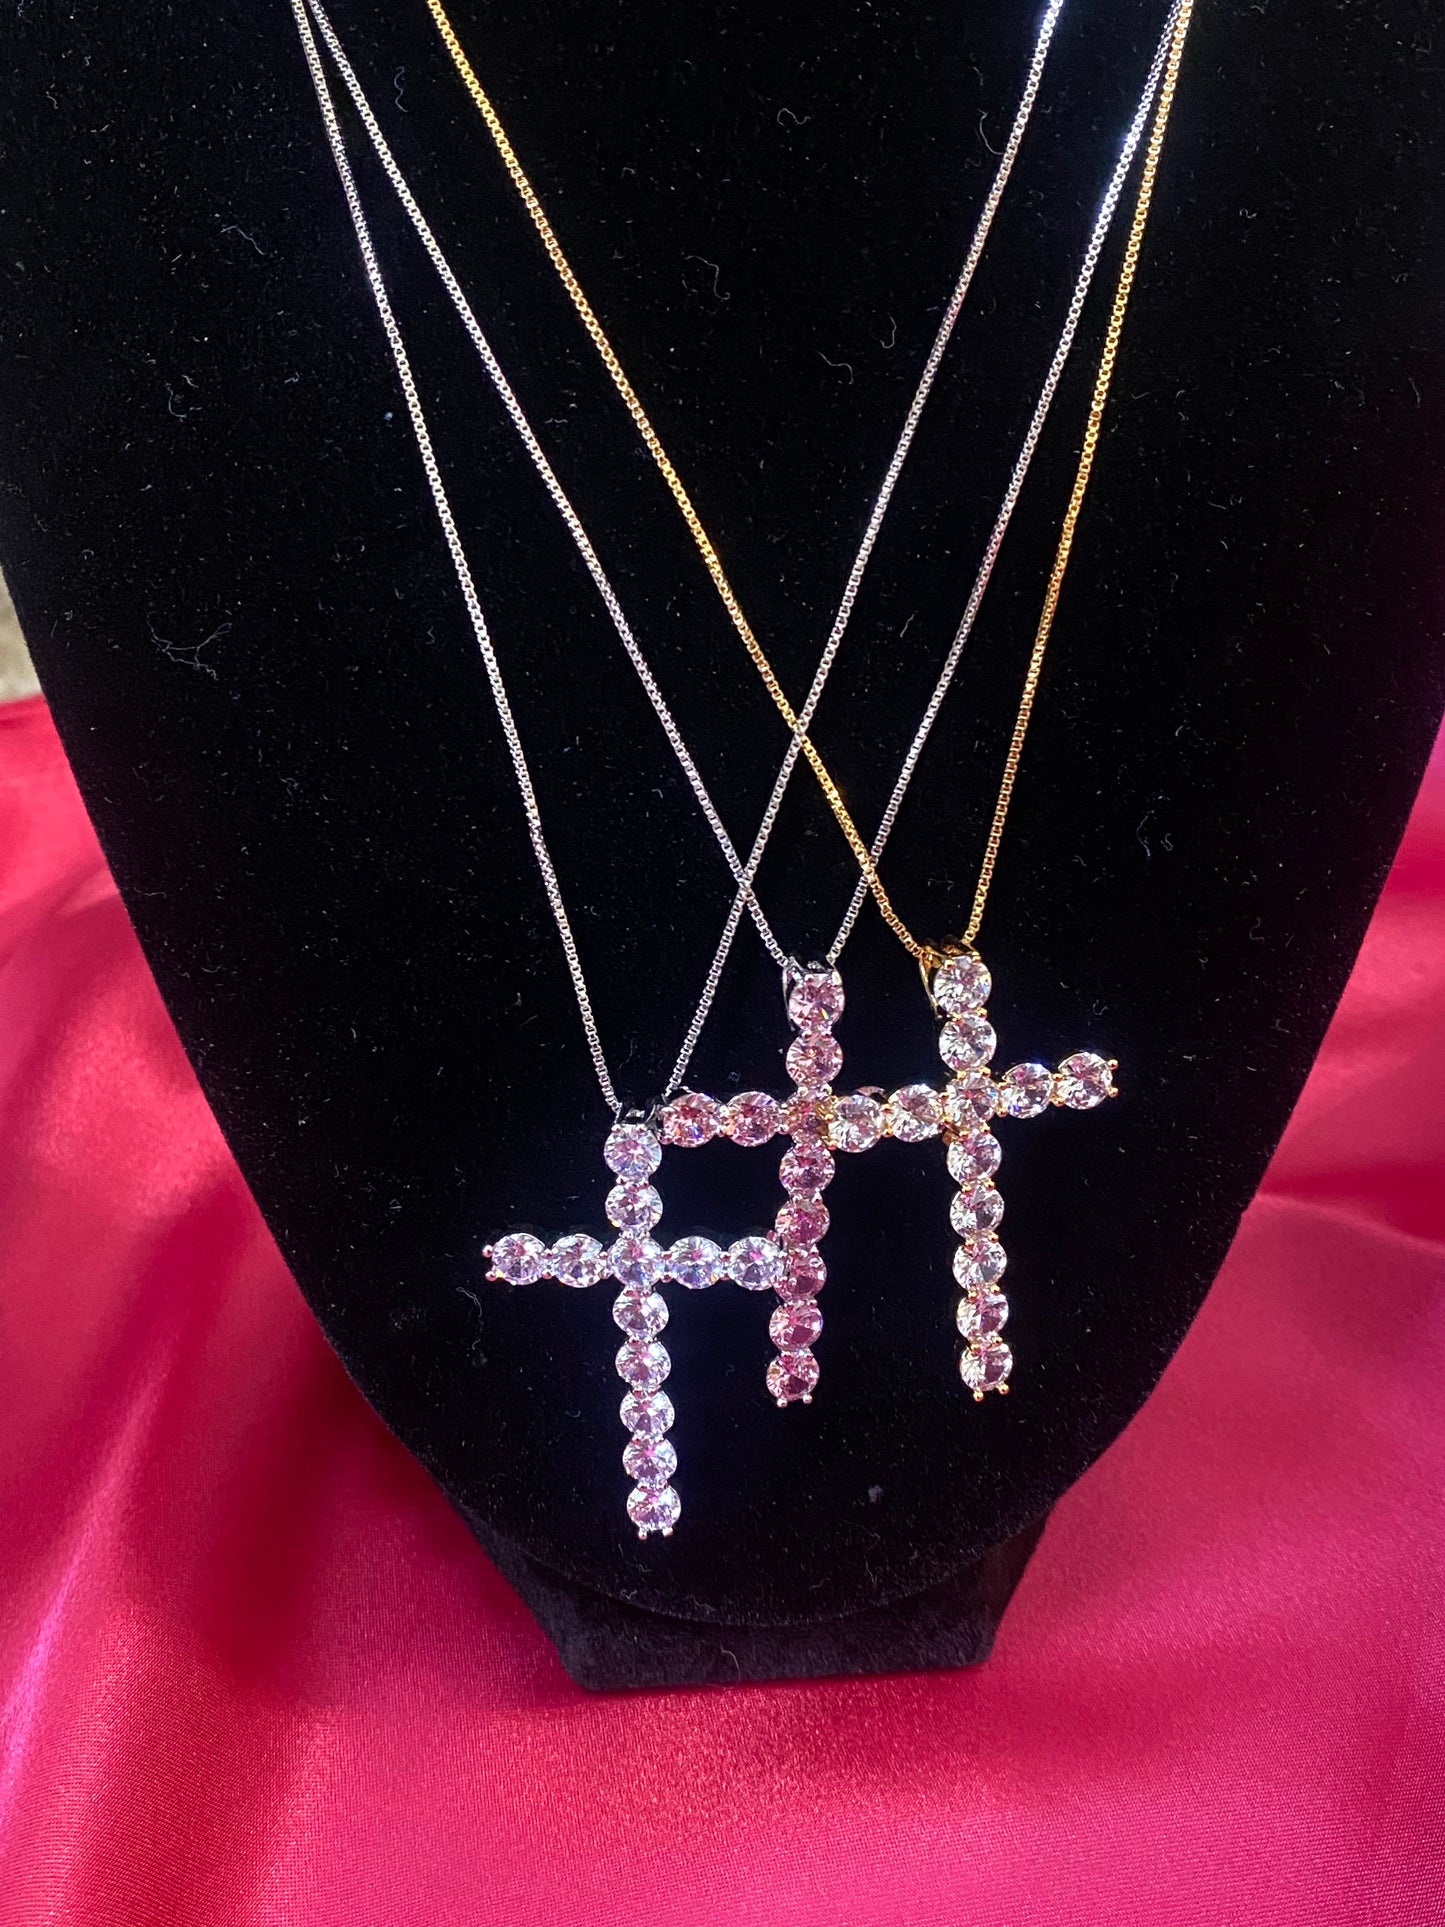 Blinged Out Cross Necklace